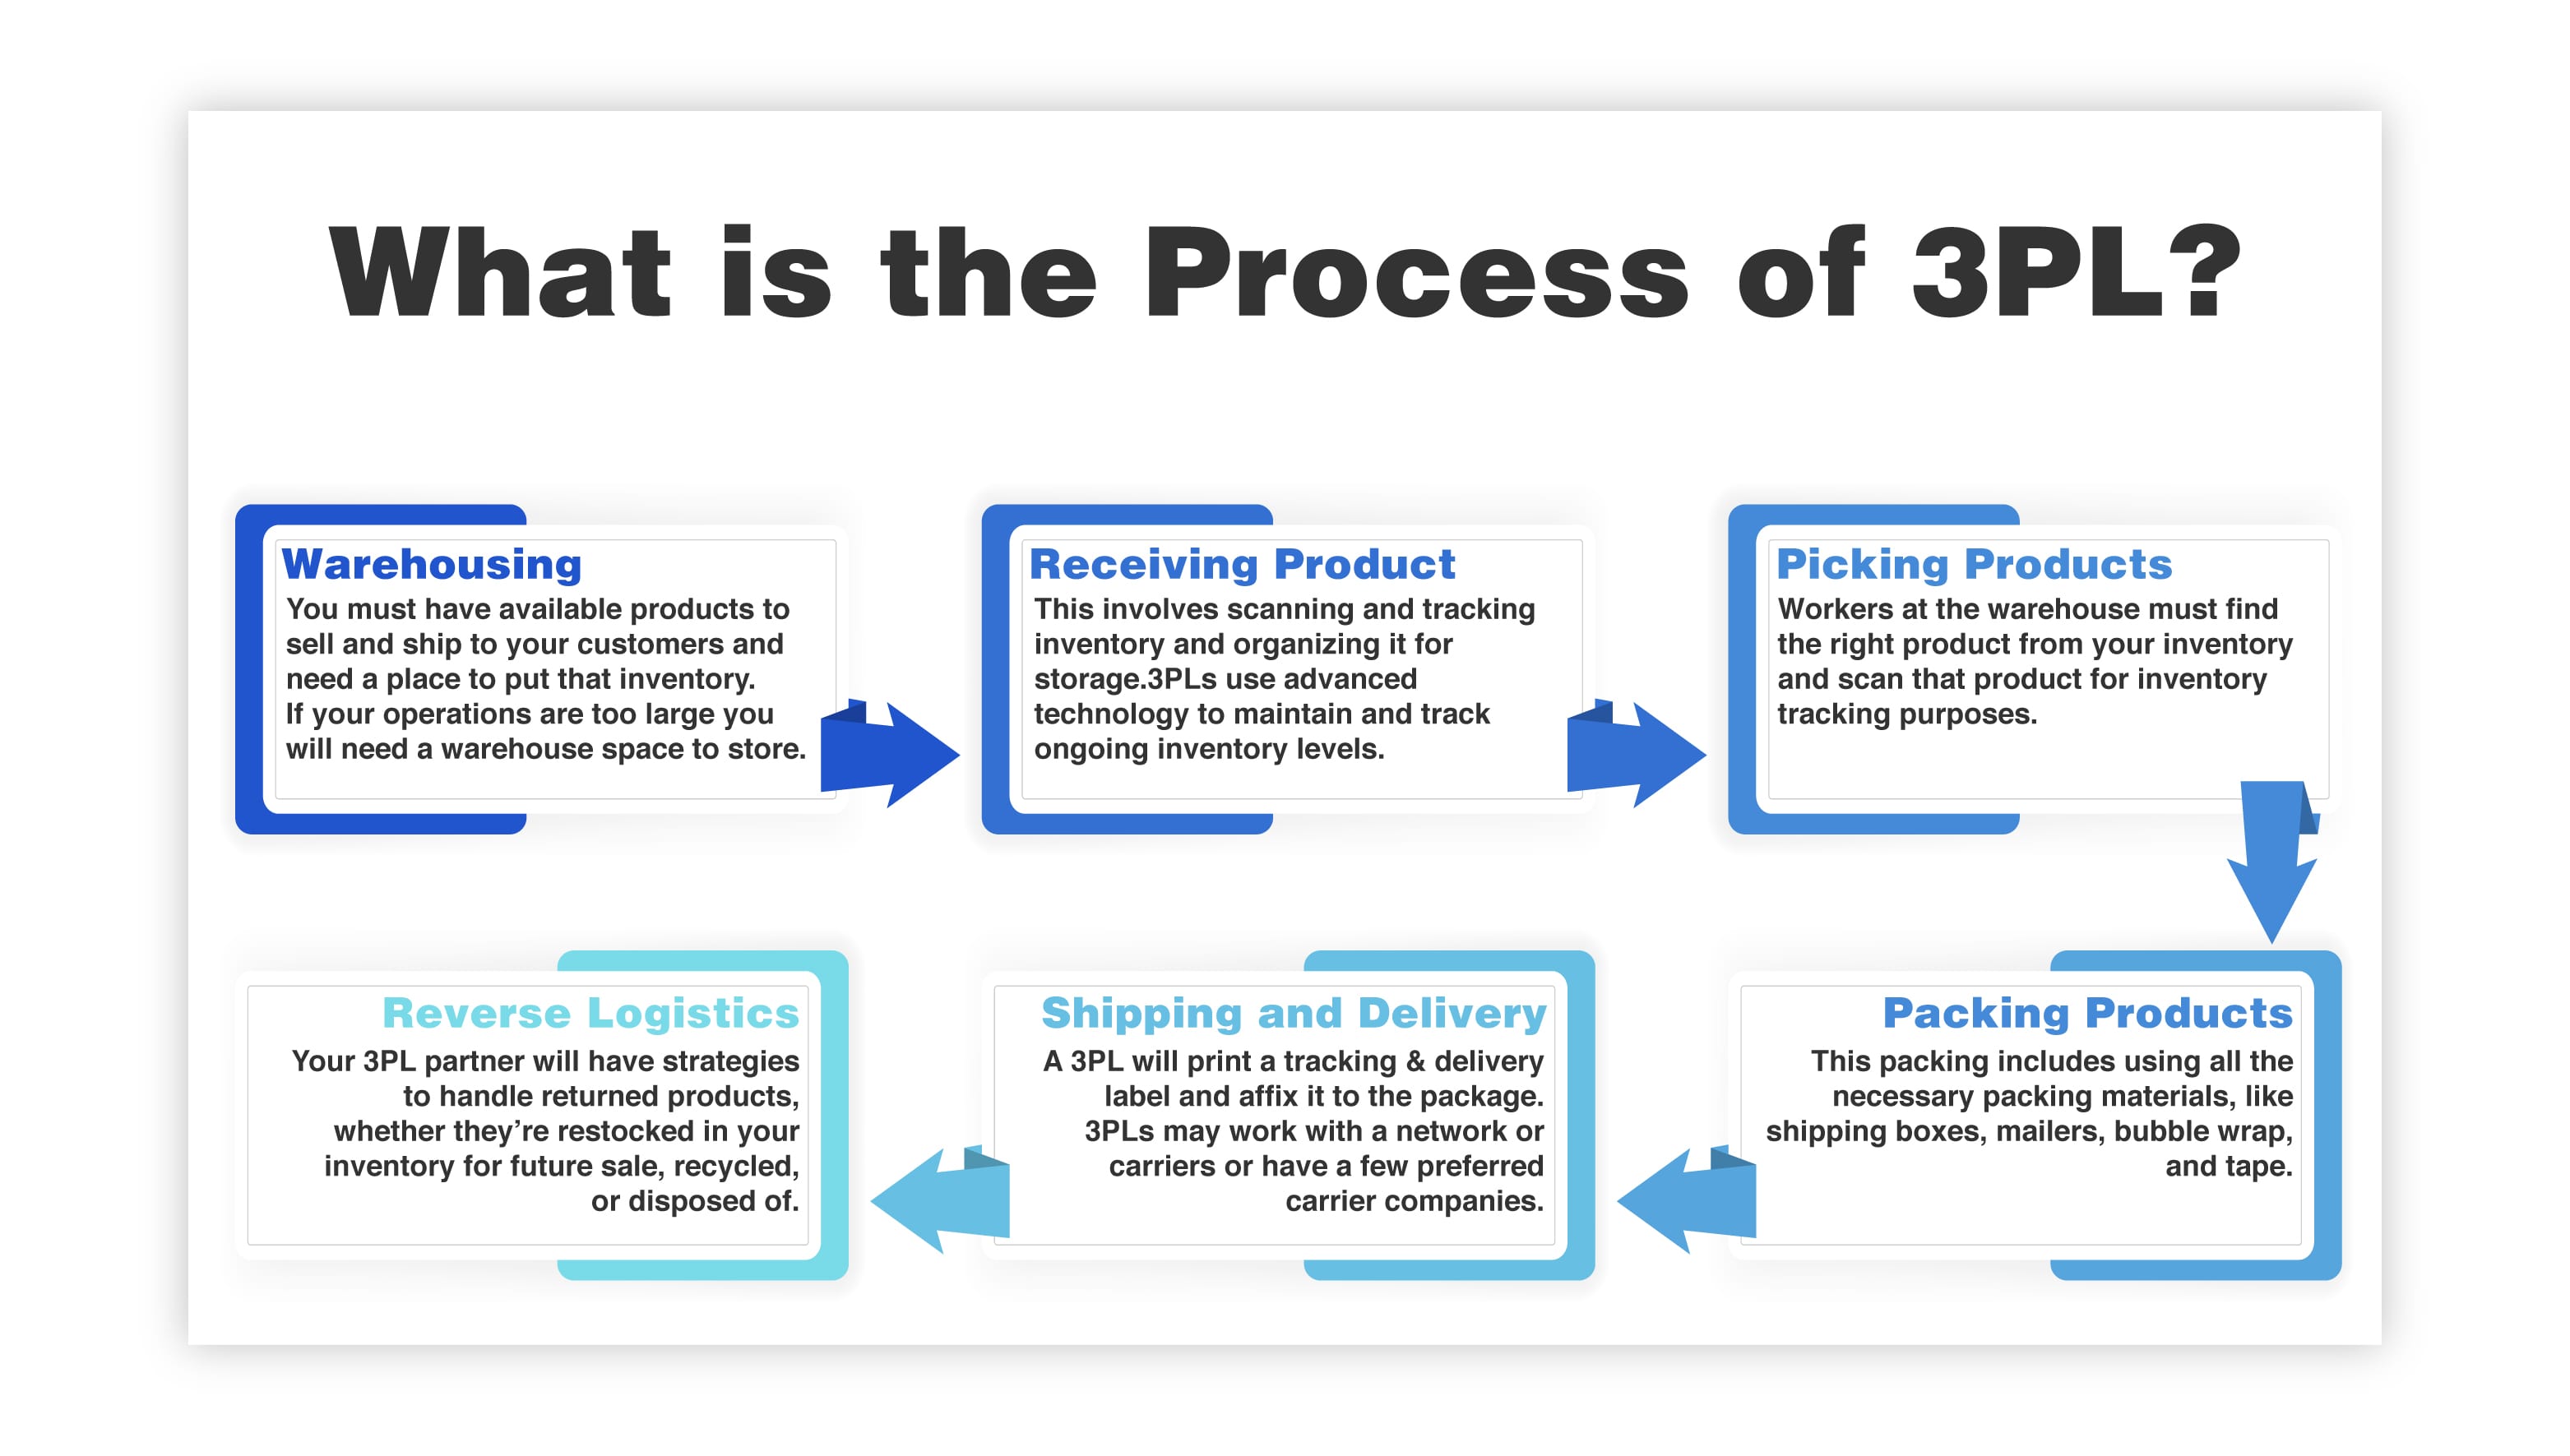 What is the Process of 3PL?